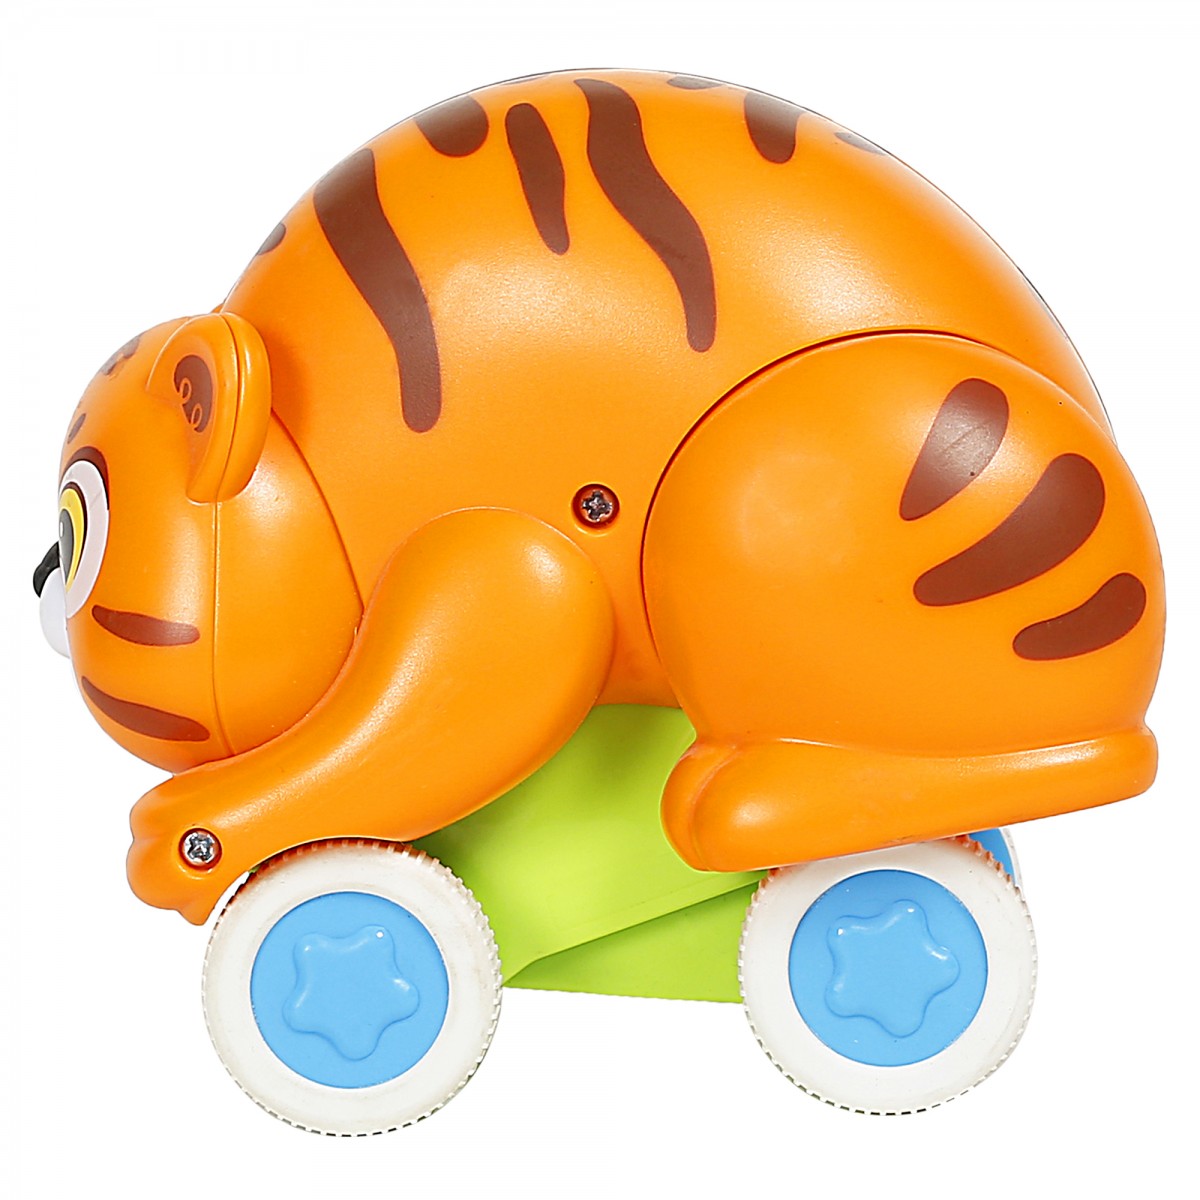 Shooting Star Rolling Tiger for Unlimited Play & Fun, Orange, 12M+